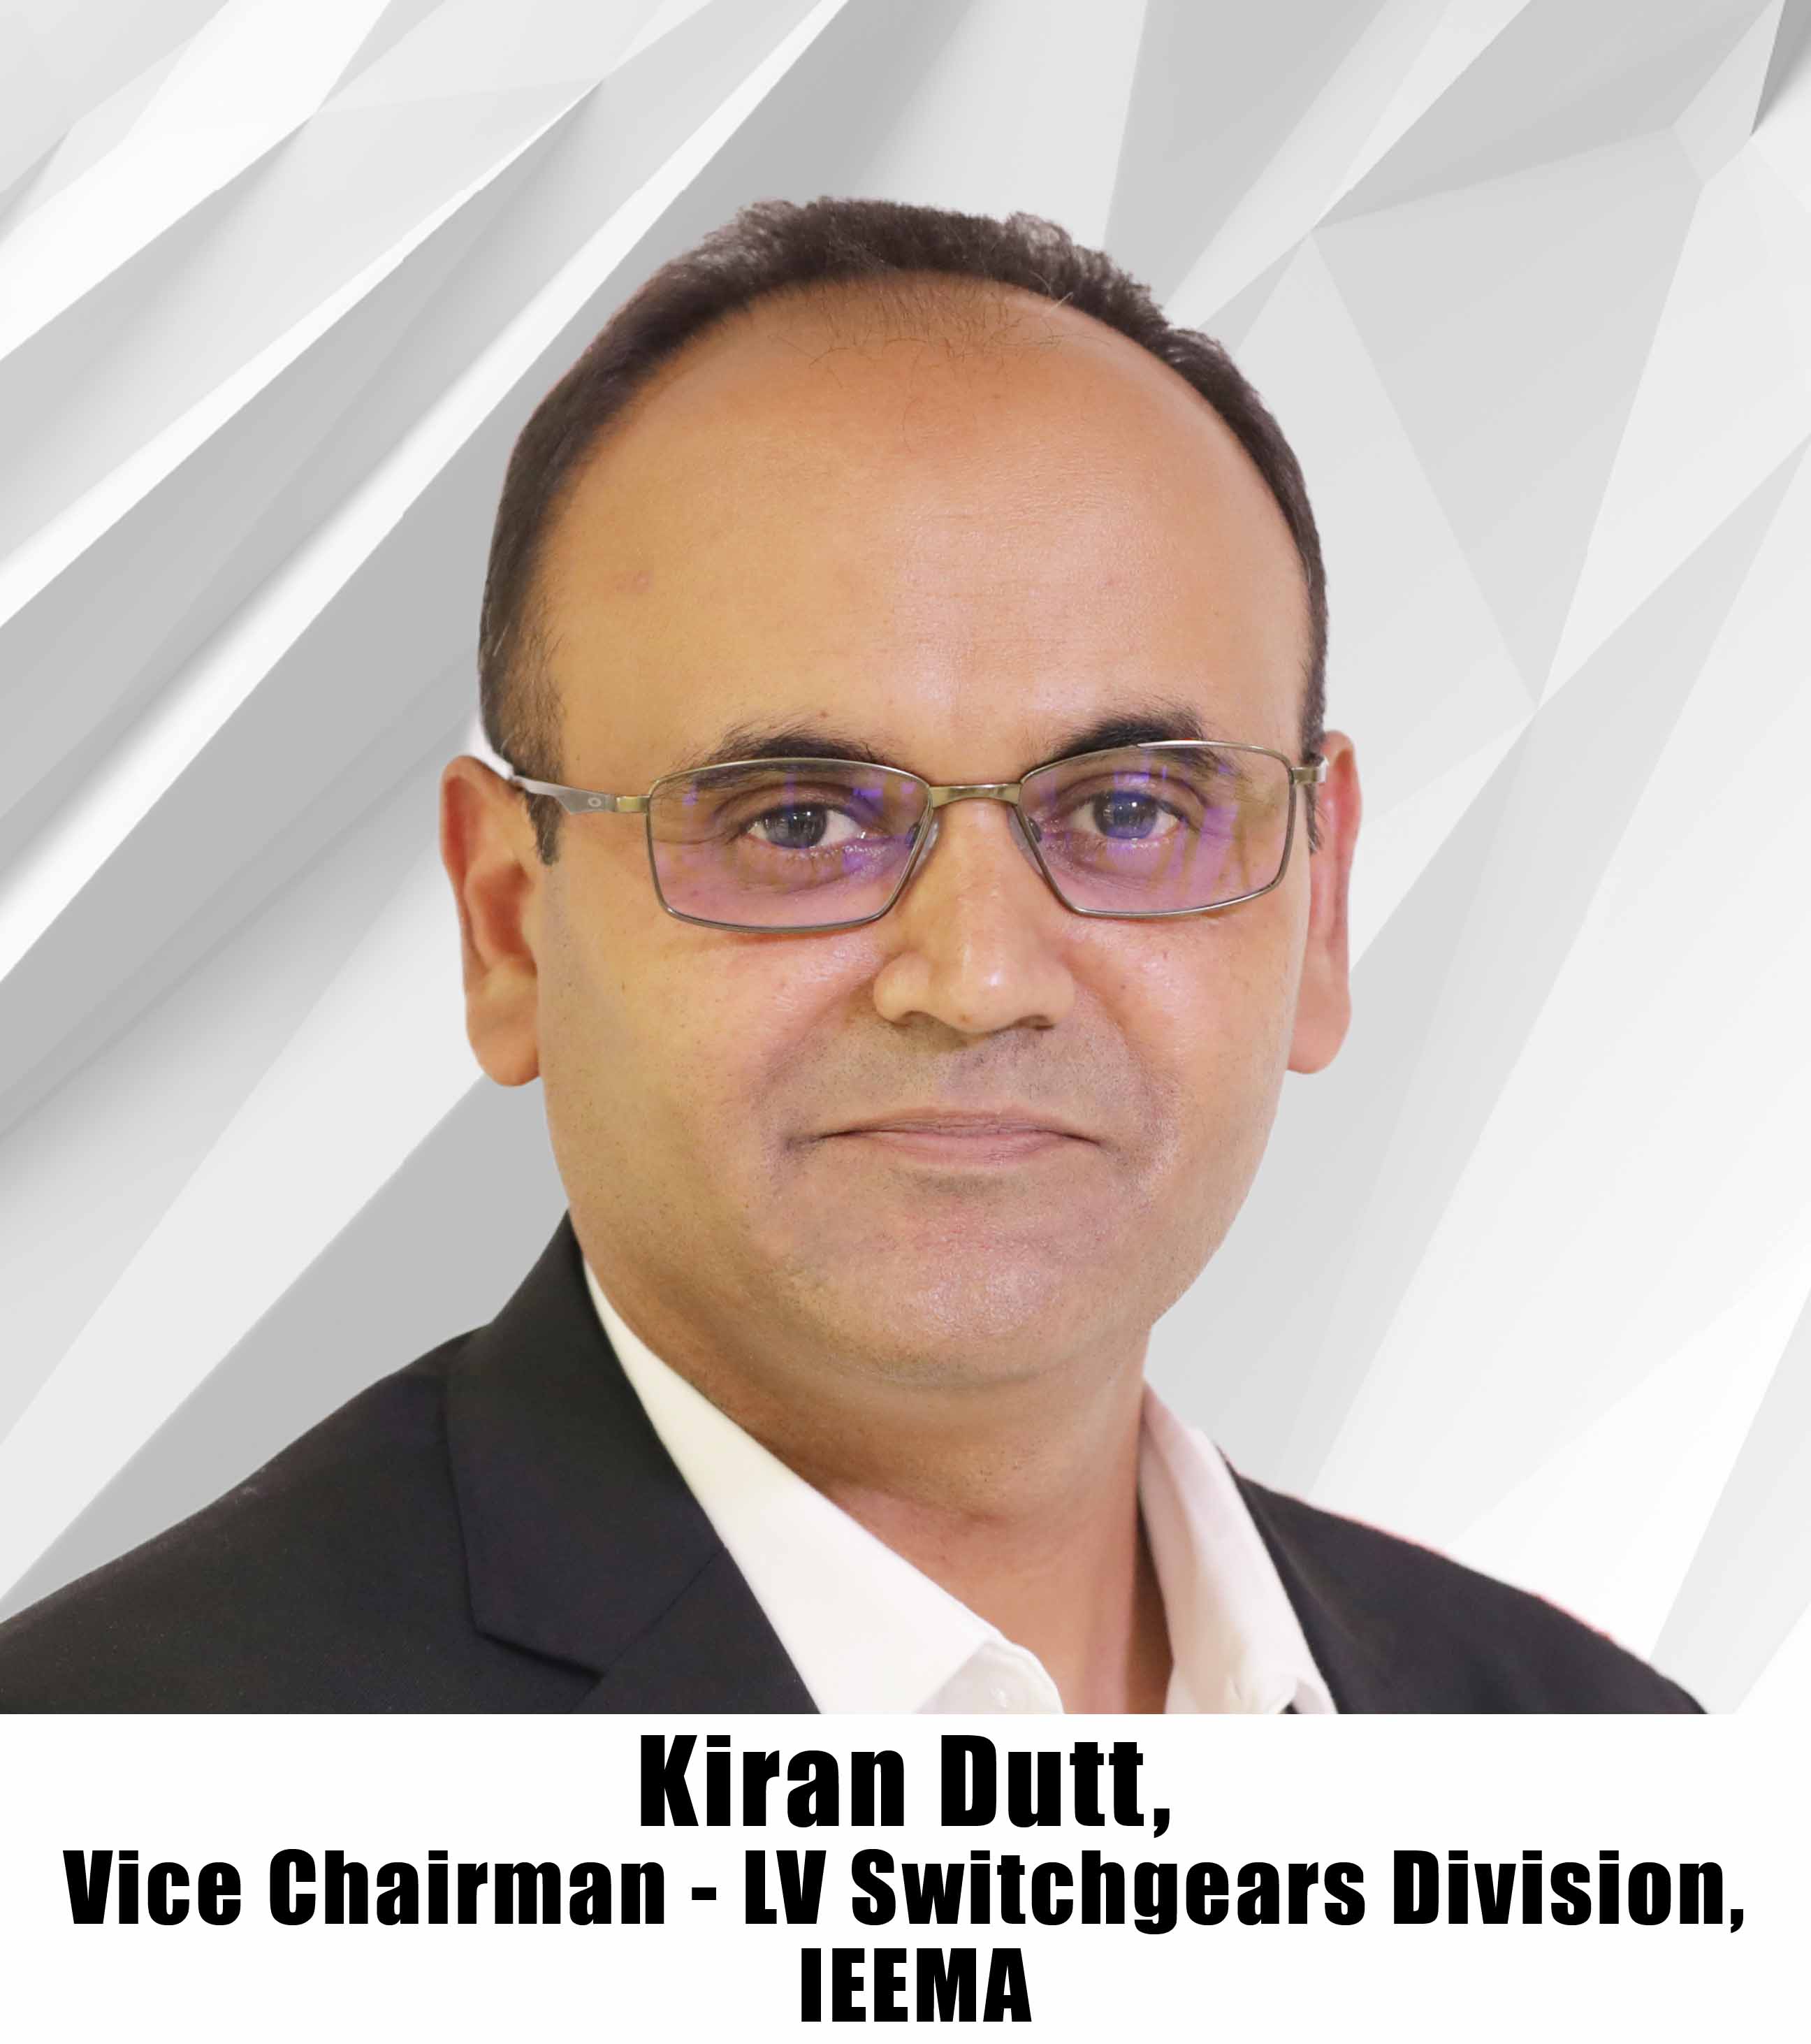 Kiran Dutt appointed as Vice Chairman for IEEMA's LV Switchgears Division